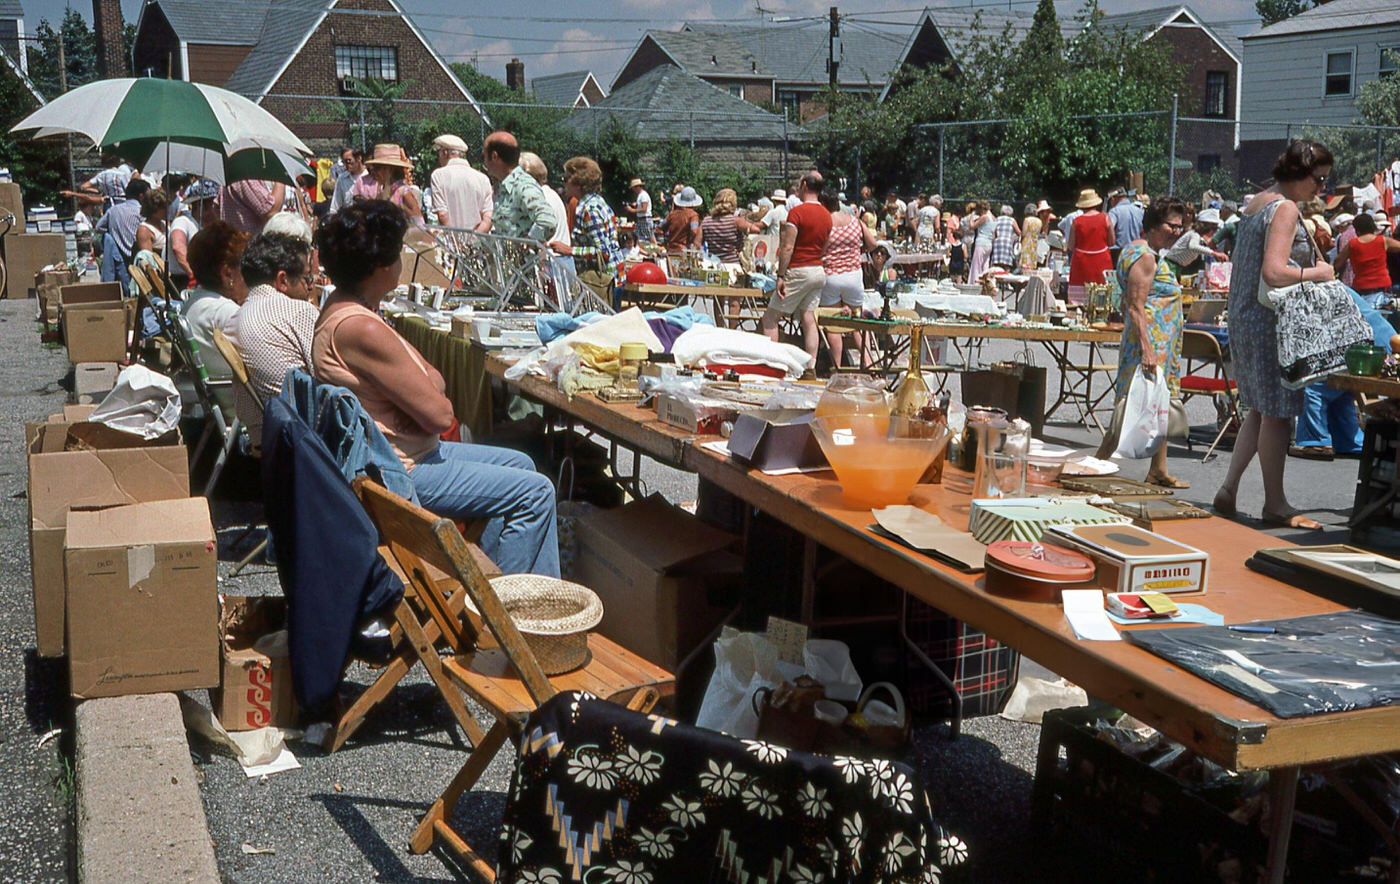 Vendors Sitting At Their Tables At An Outdoor Flea Market On Woodhaven Boulevard In Rego Park, Queens, 1970S.